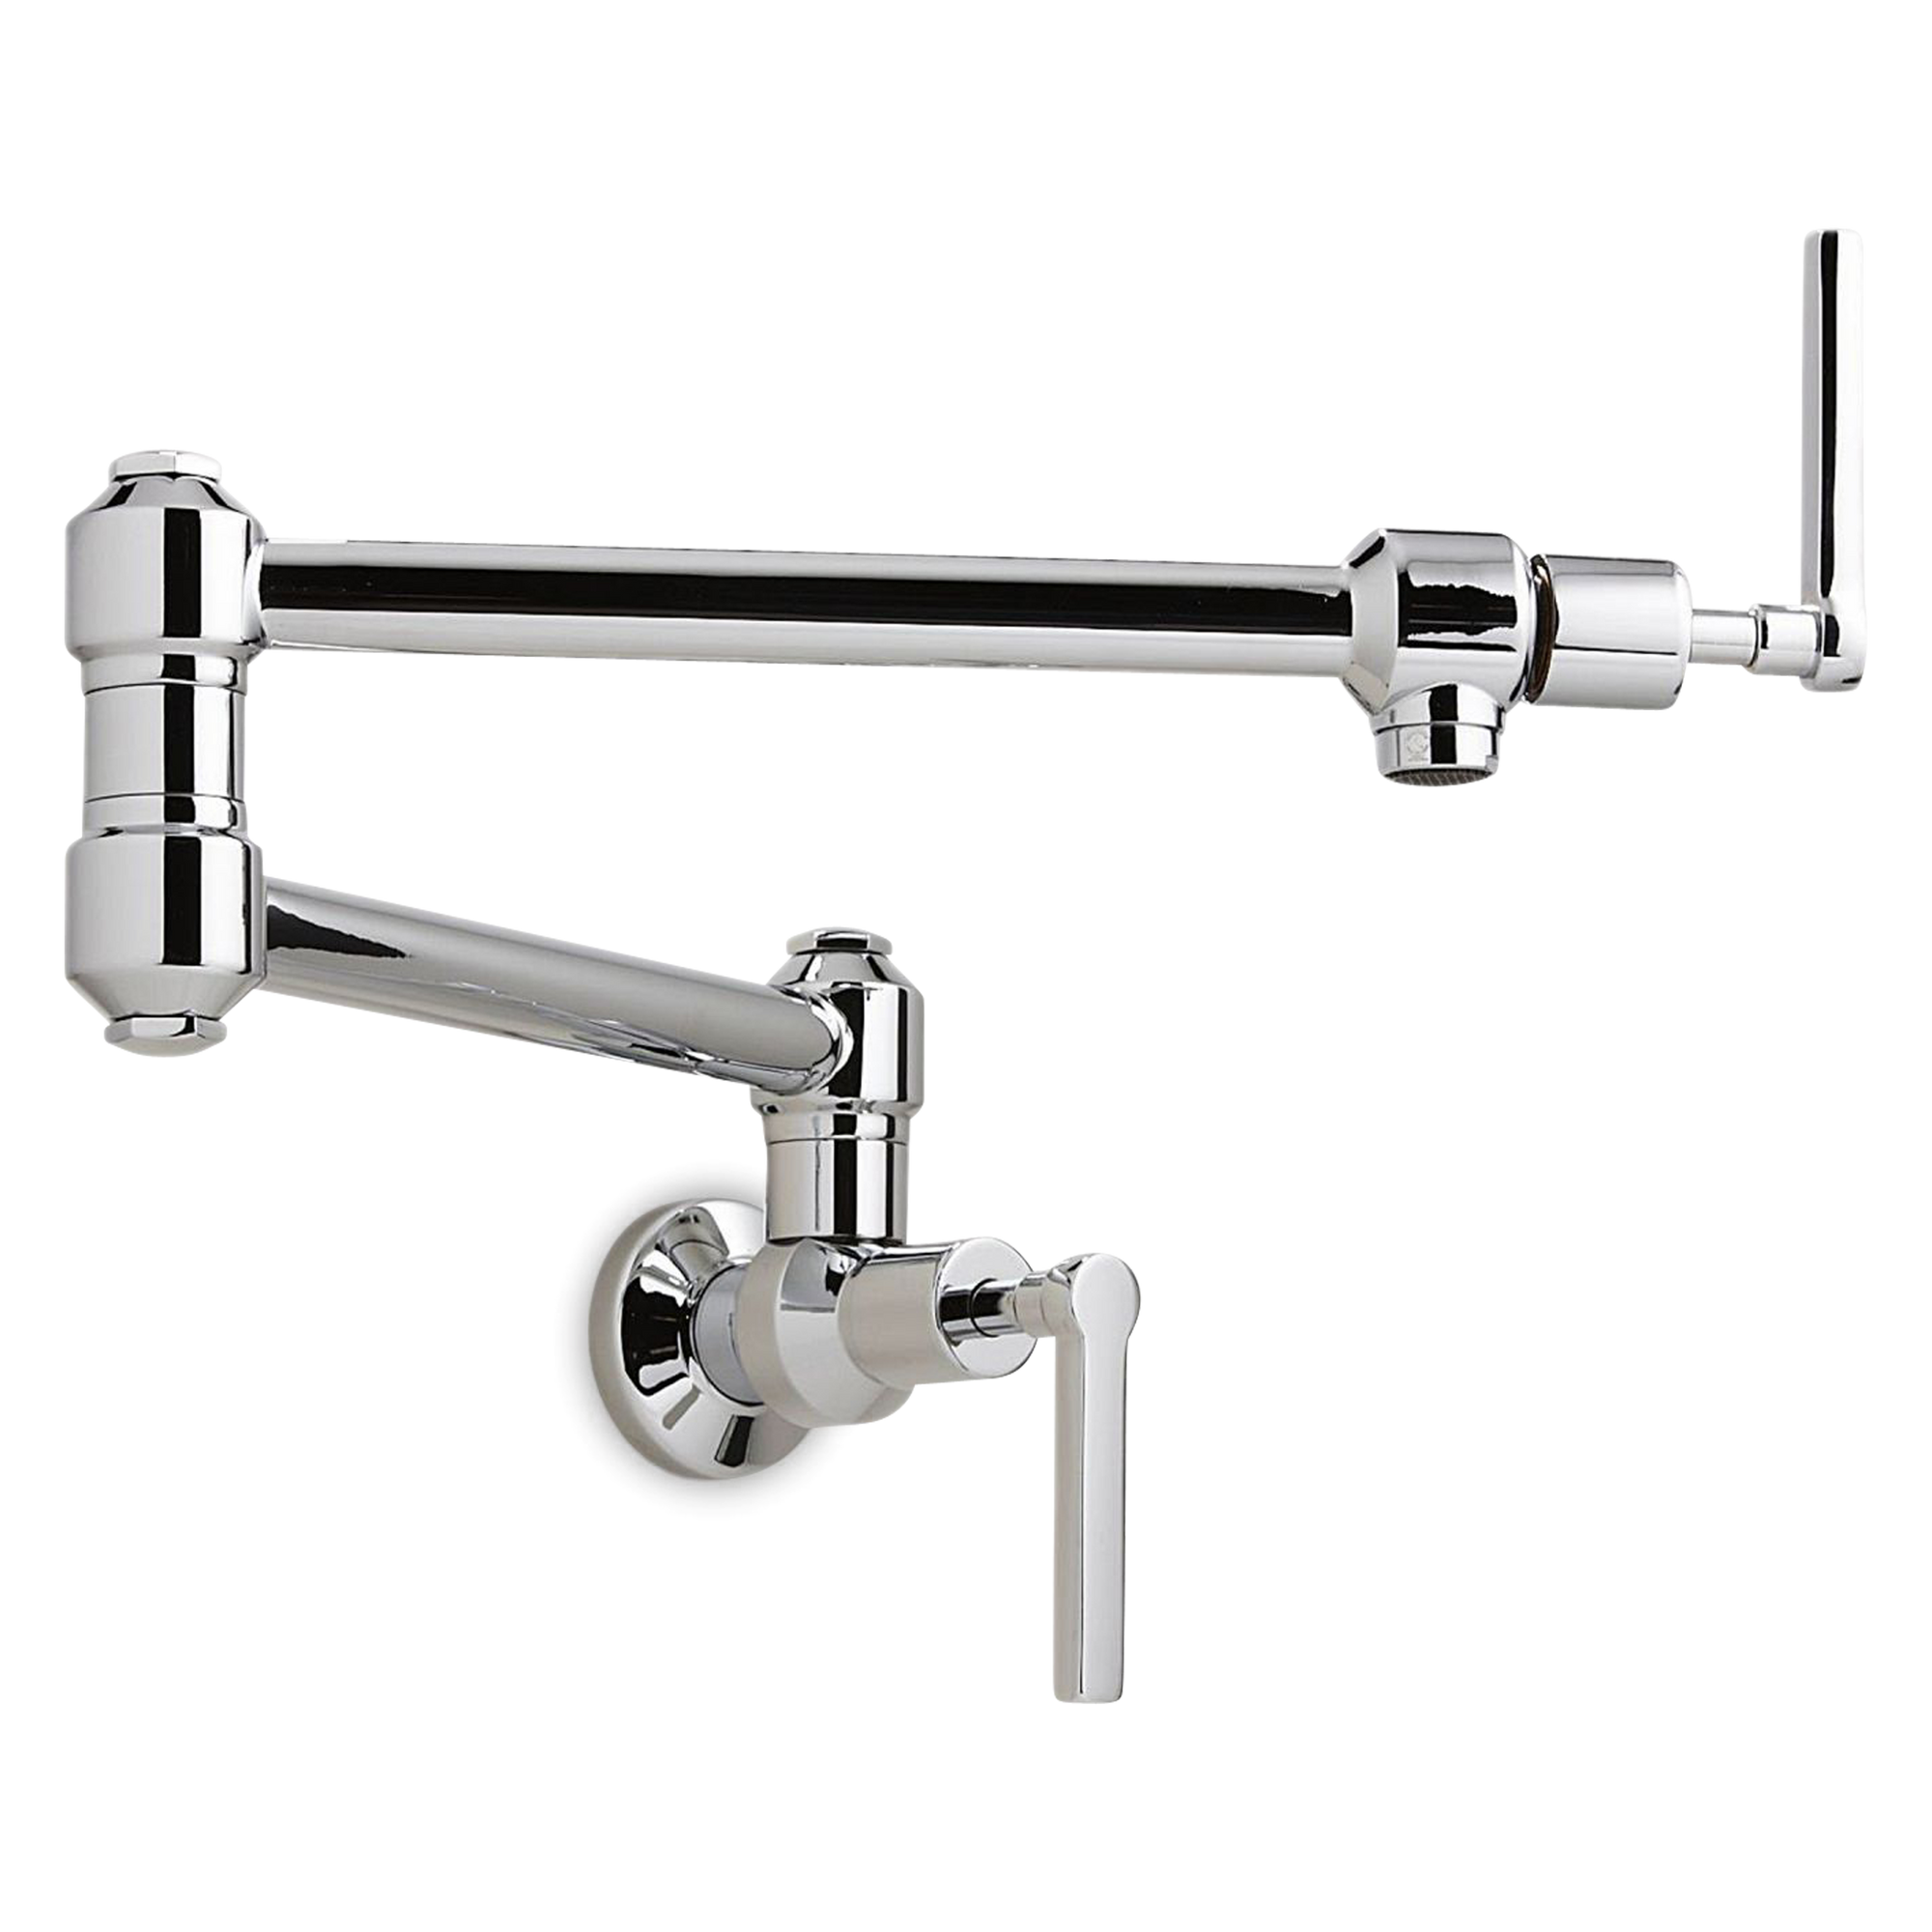 The Avenue pot filler is a sleek, industrial style, wall-mounted faucet featuring double shut-offs, and a maneuverable swing arm that eliminates the need to reach over hot burners.